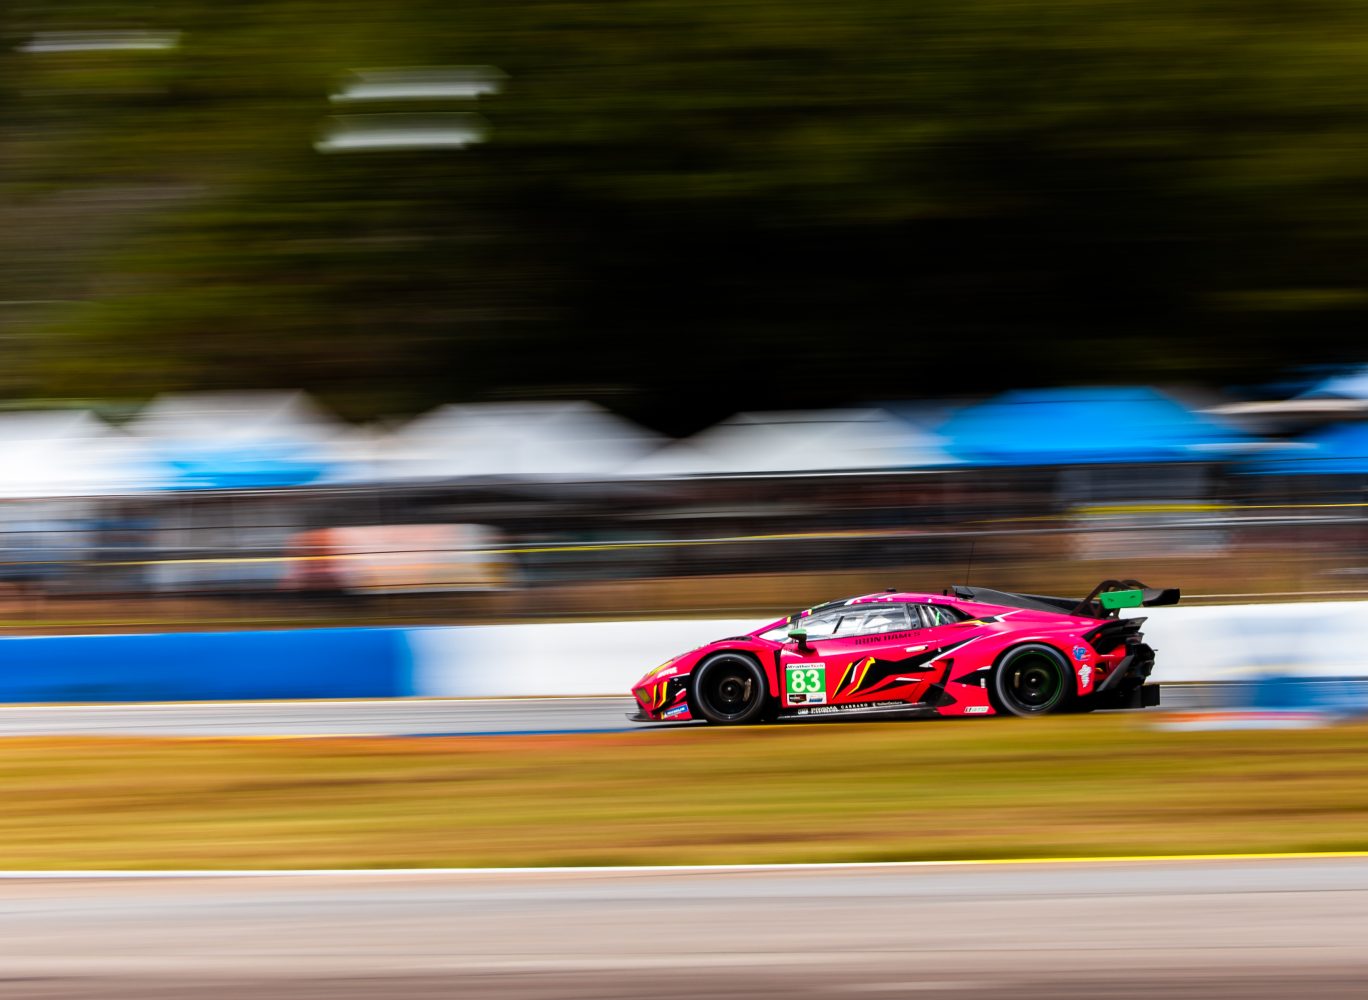 THE IRON DAMES END FIRST IMSA SEASON ON A POSITIVE NOTE